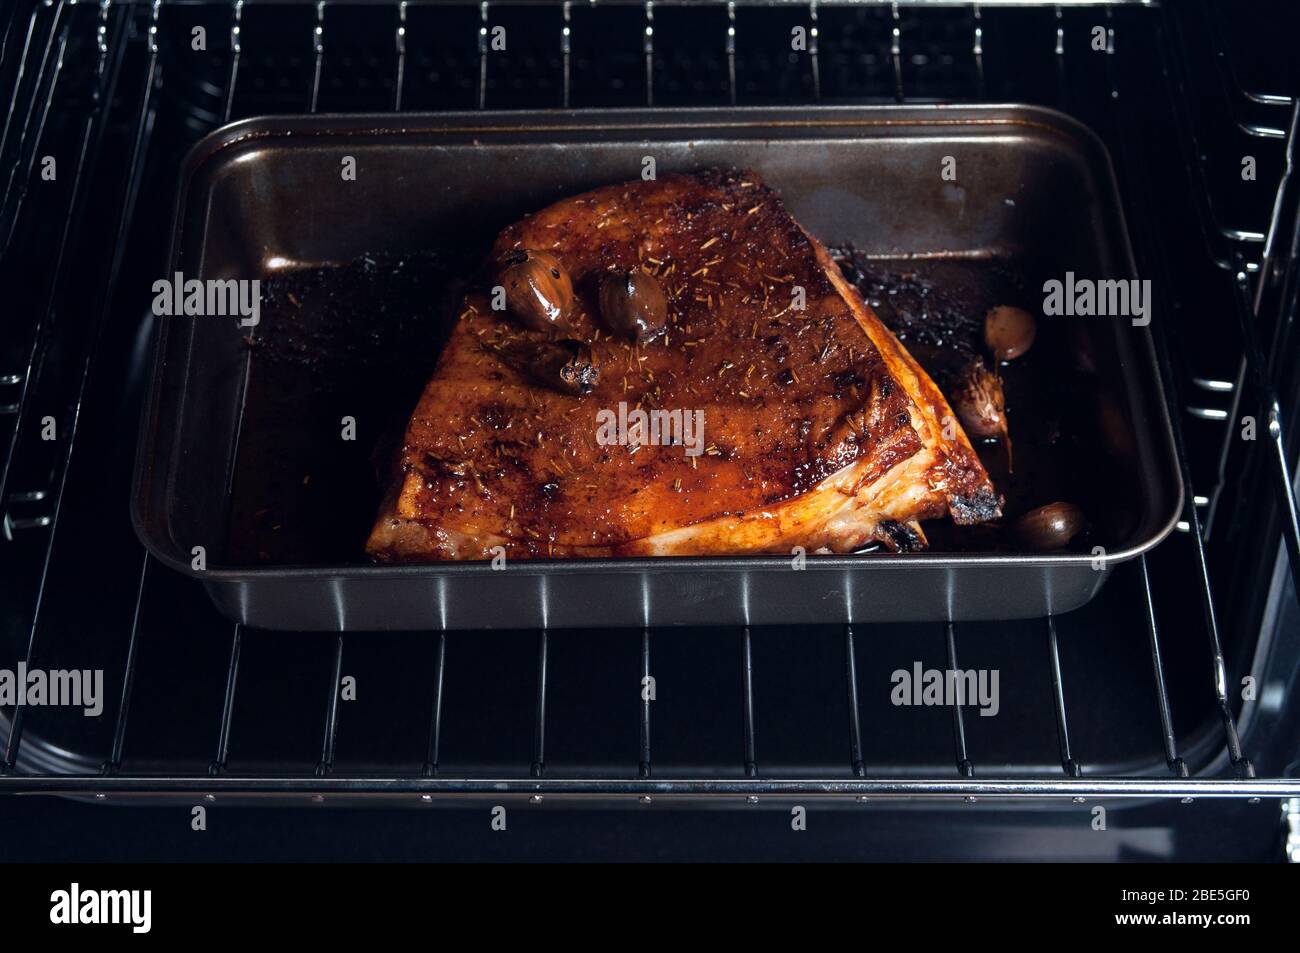 Grilled pork ribs in the oven. Meat from the oven. Ready Meat. Grilling meat  Stock Photo - Alamy